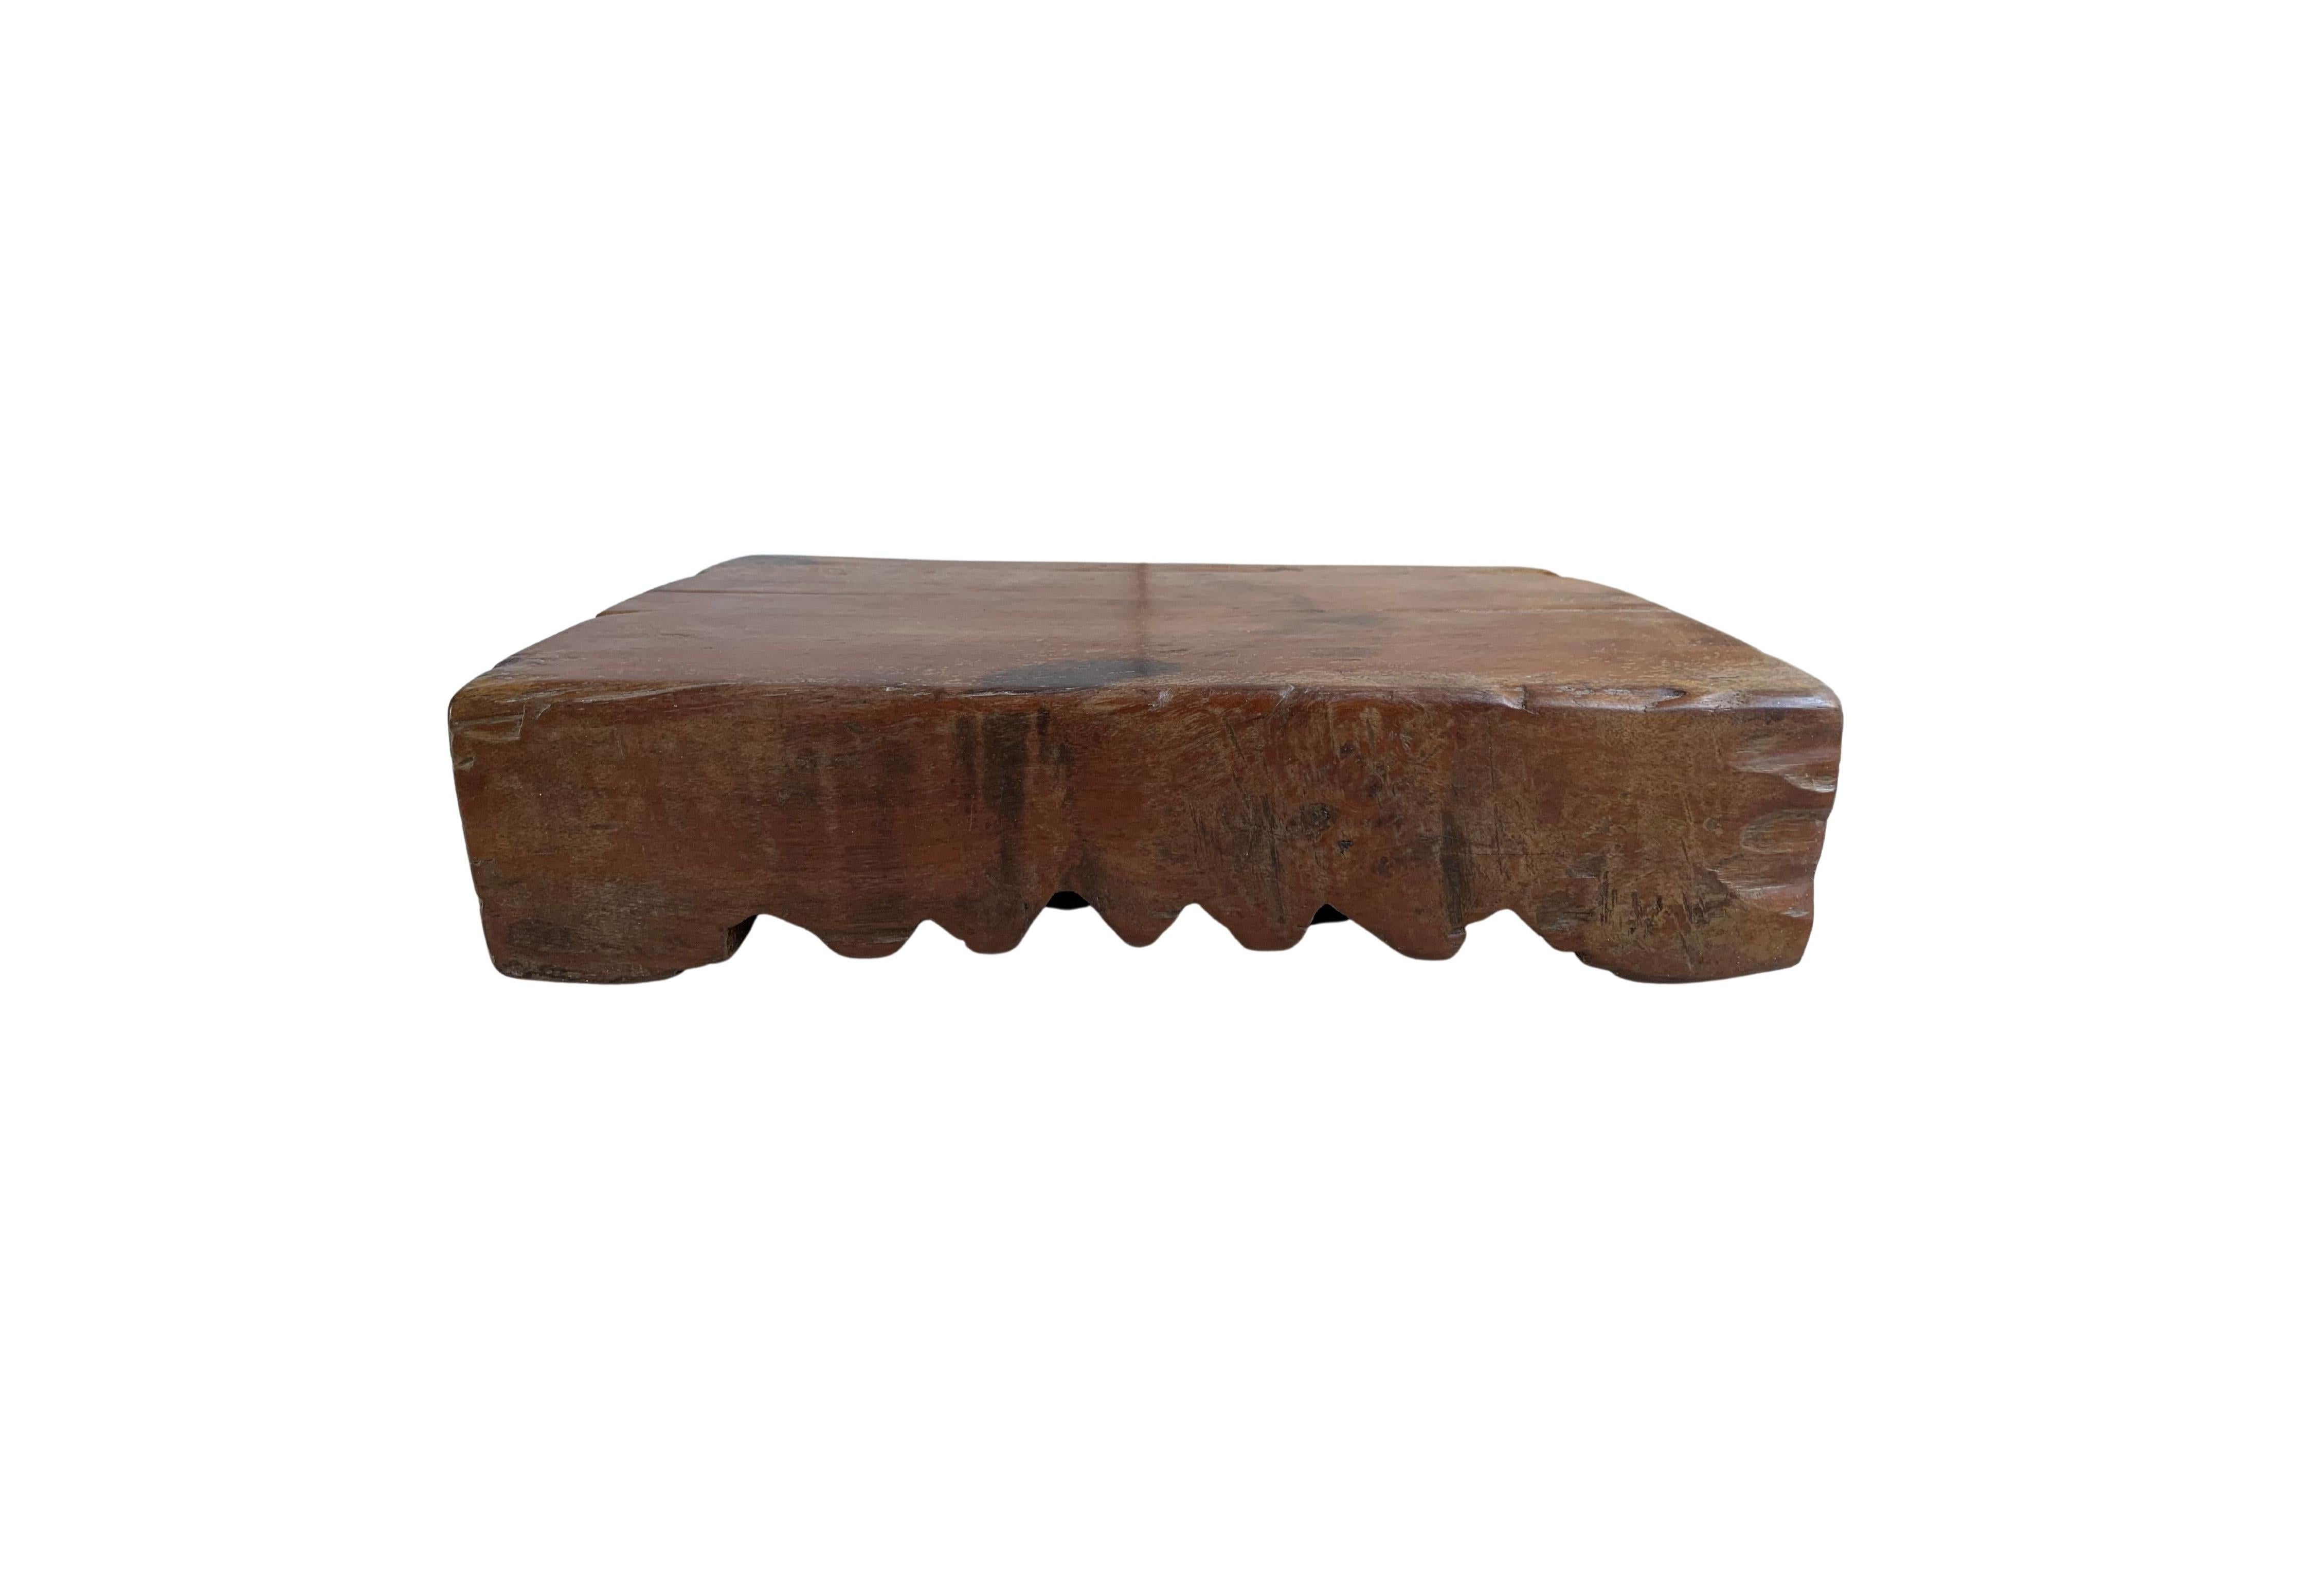 An Antique Chinese chopping block with hand-carved detailing. Made from a single block of hardwood, the block is relatively heavy and solid. A wonderful piece to use as a decorative centrepiece, or cheese / food board. 

